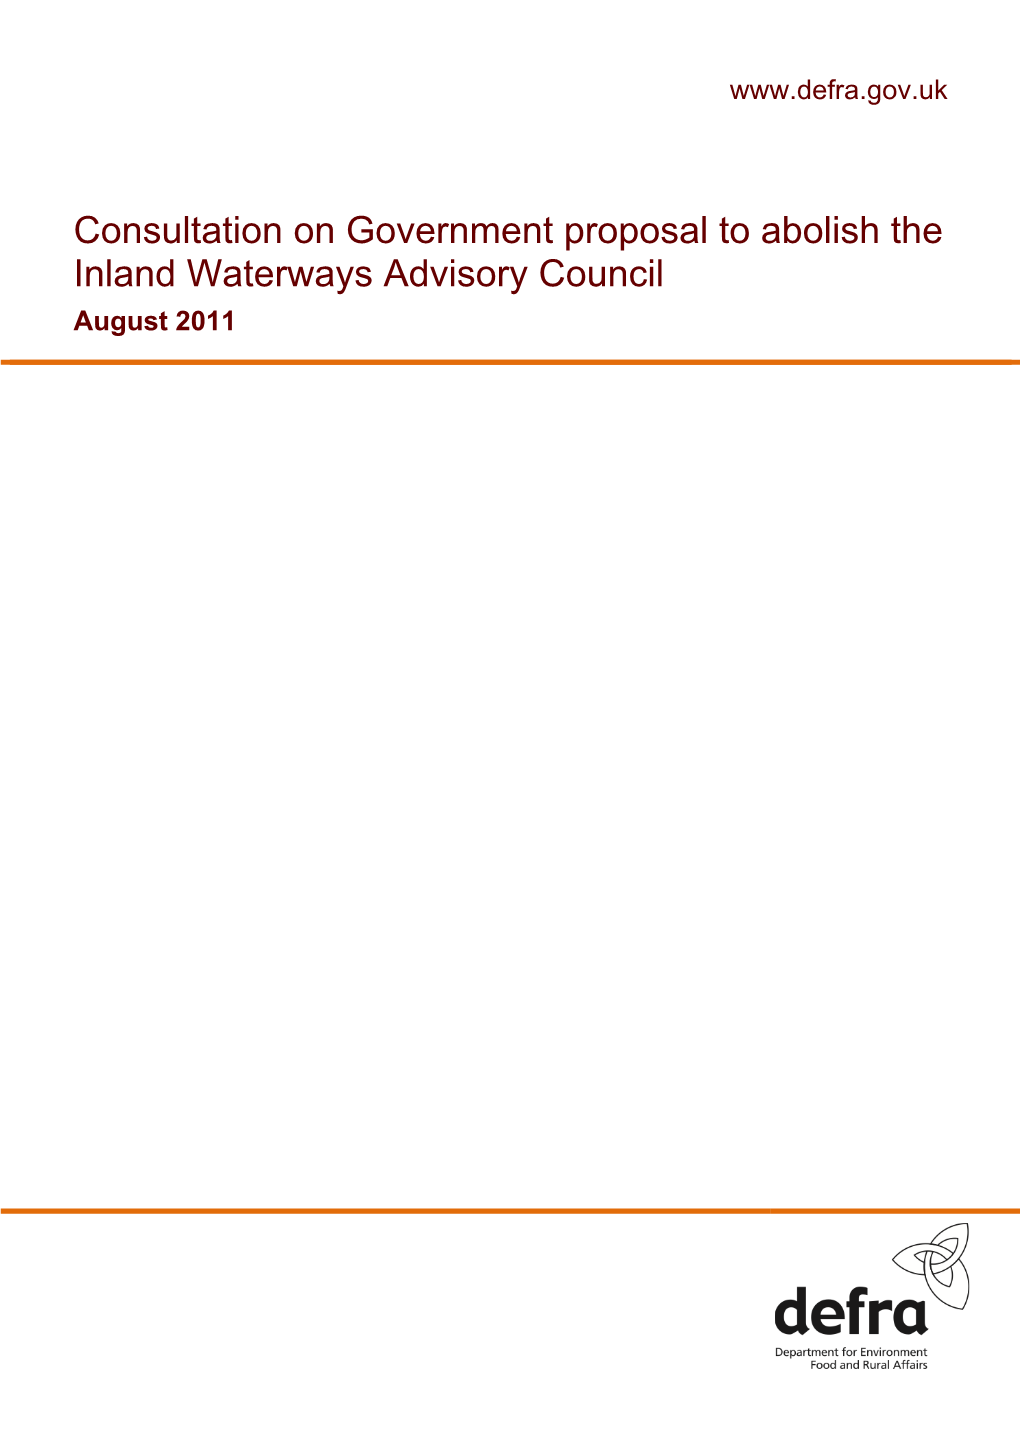 Consultation on the Abolition of the Inland Waterways